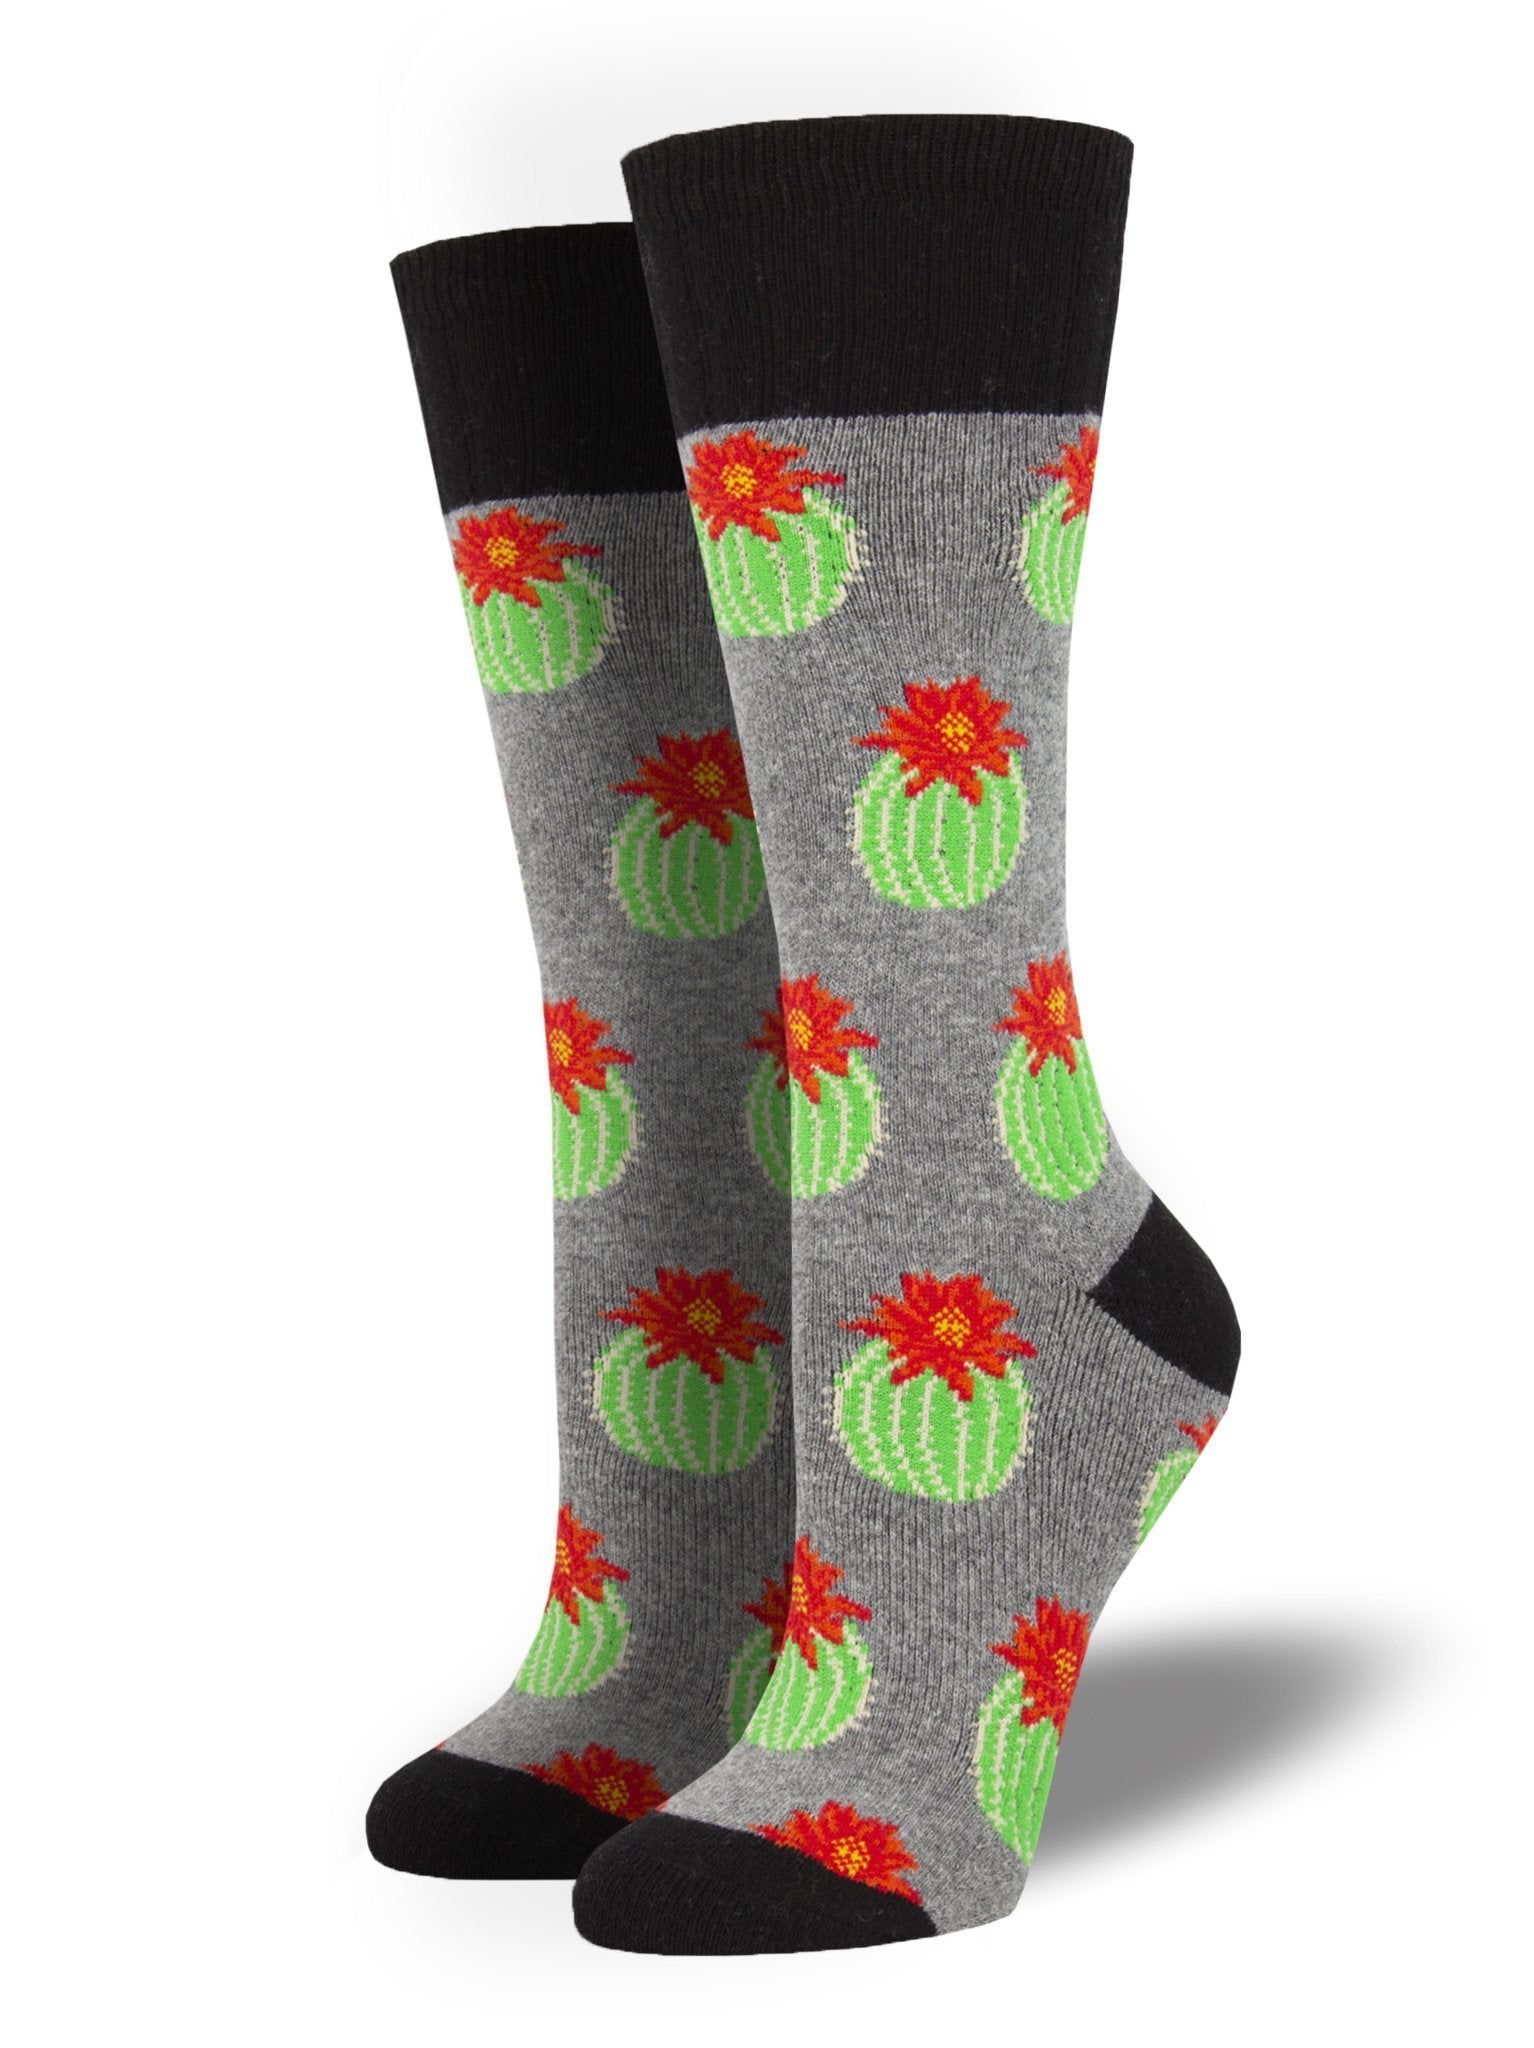 Outlands Recycled Wool Cactus Socks